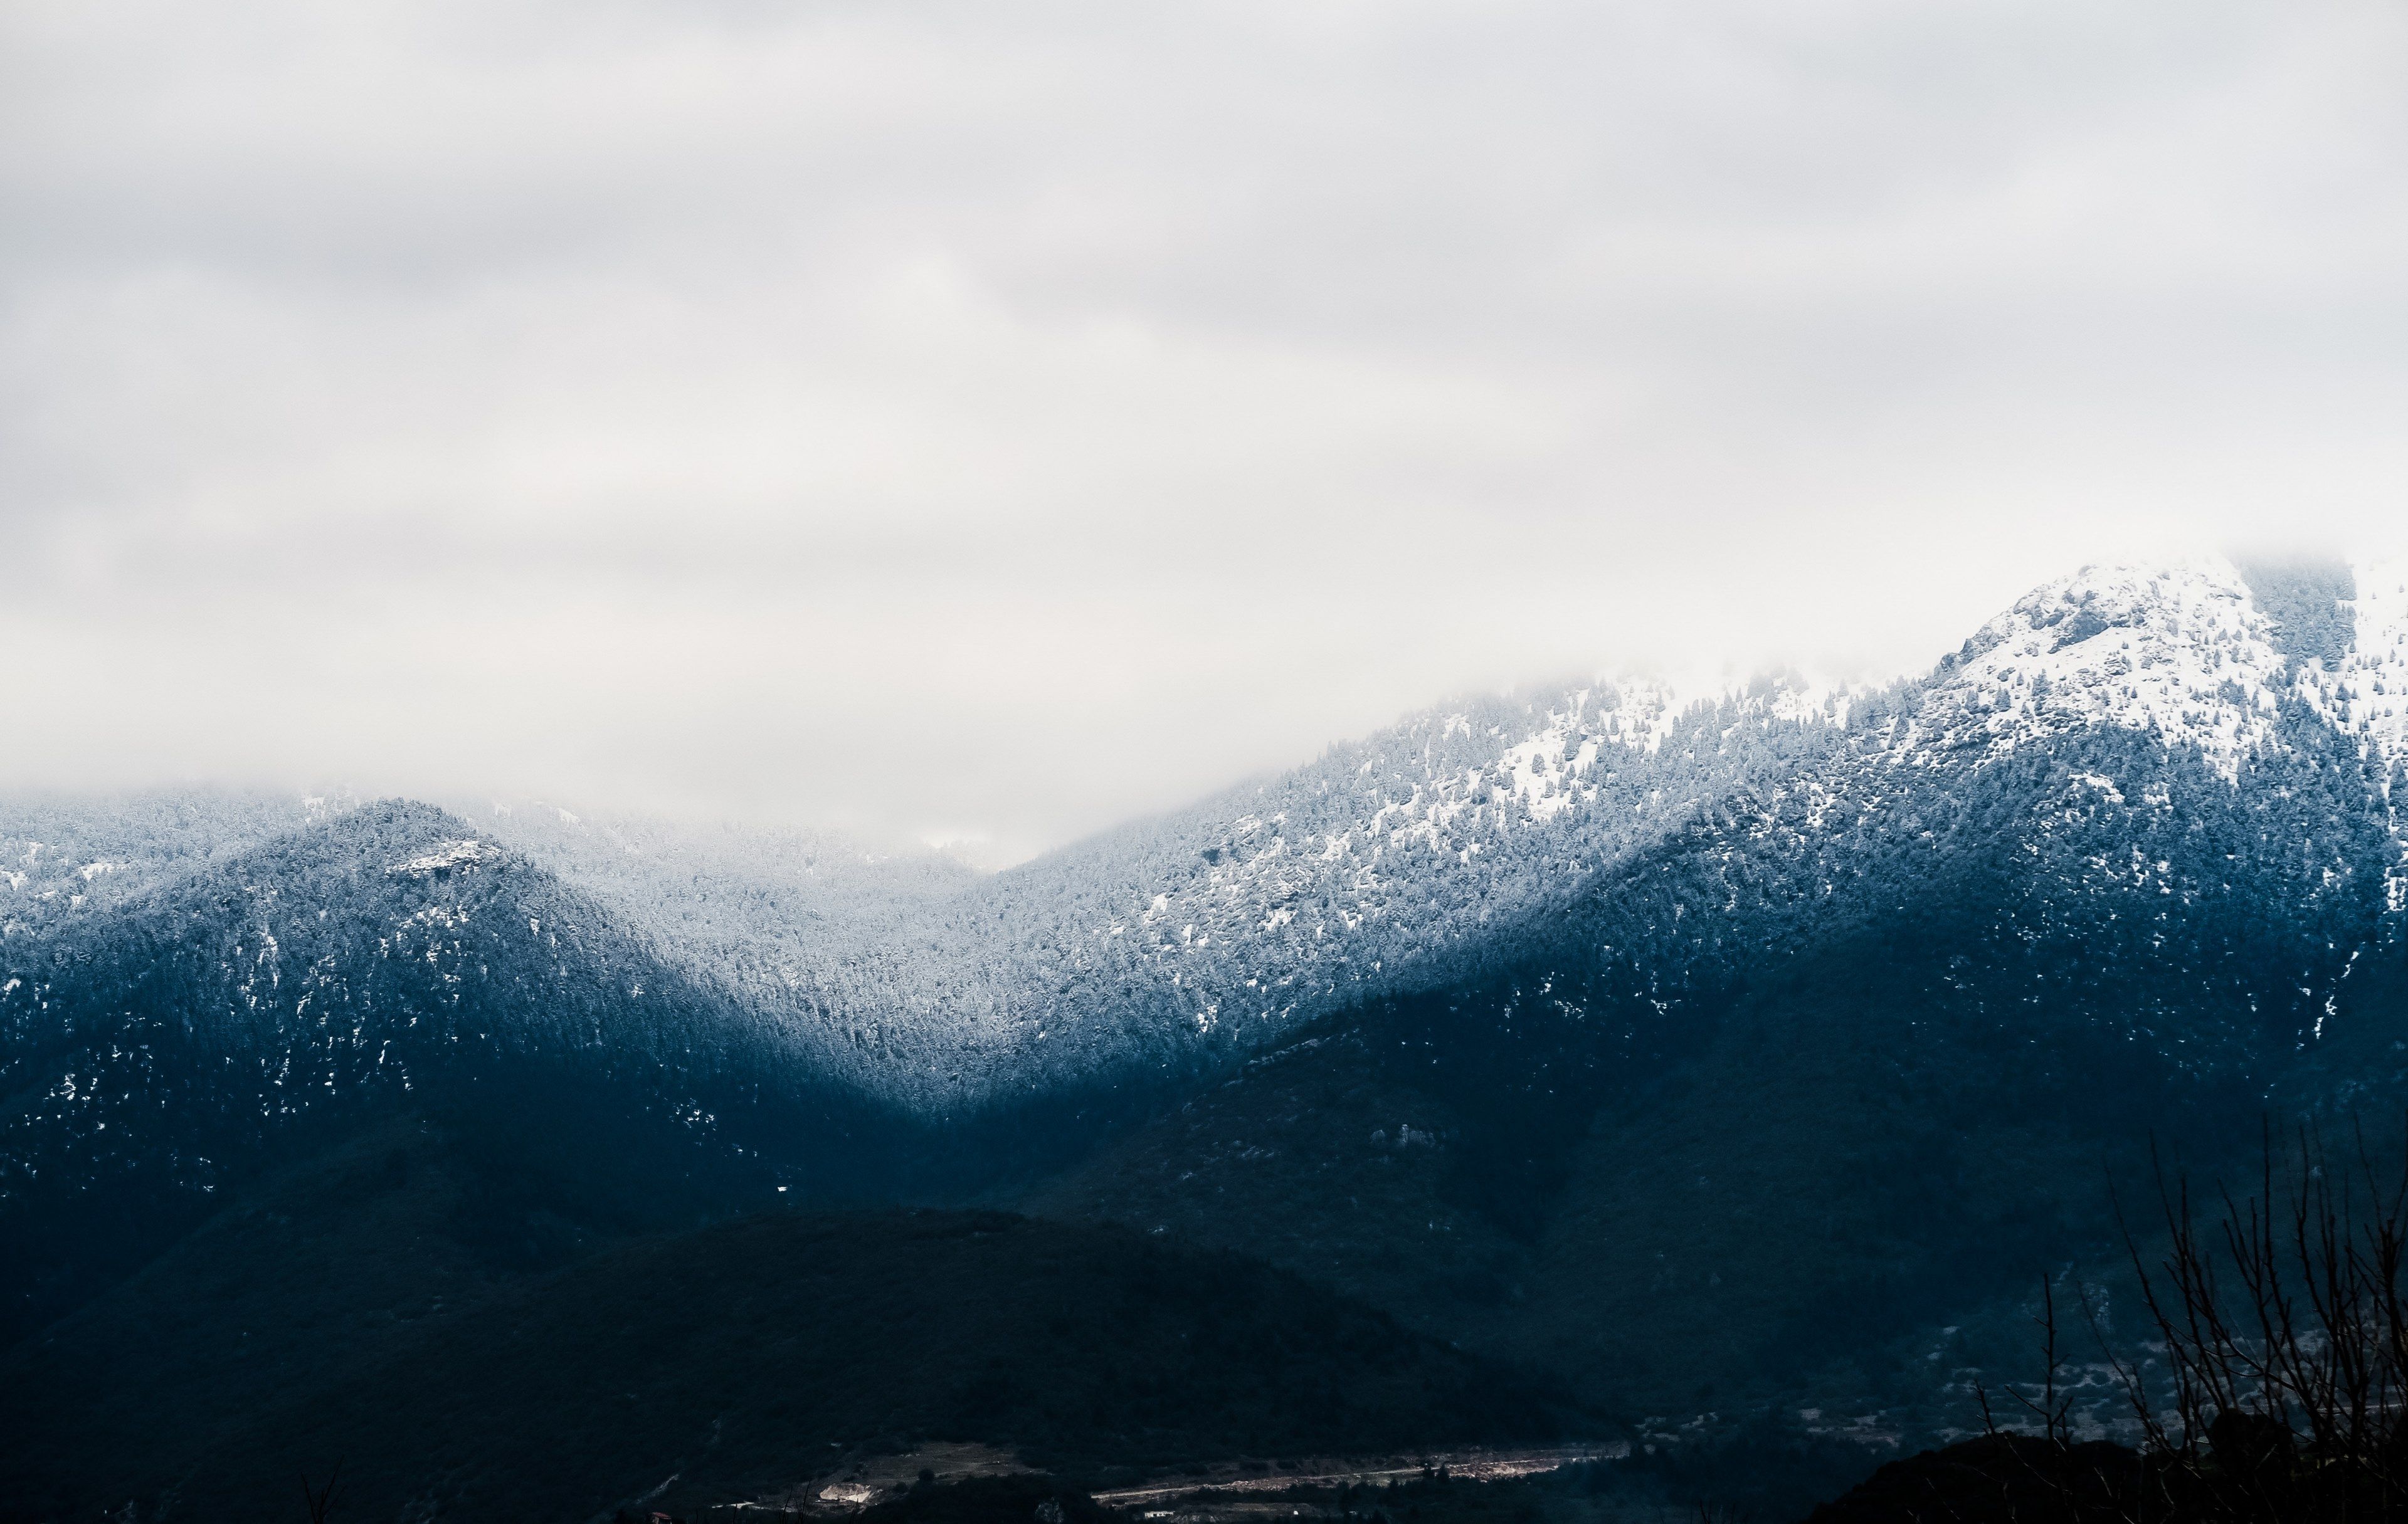 A snow-covered mountain range with a cloudy sky. - Mountain